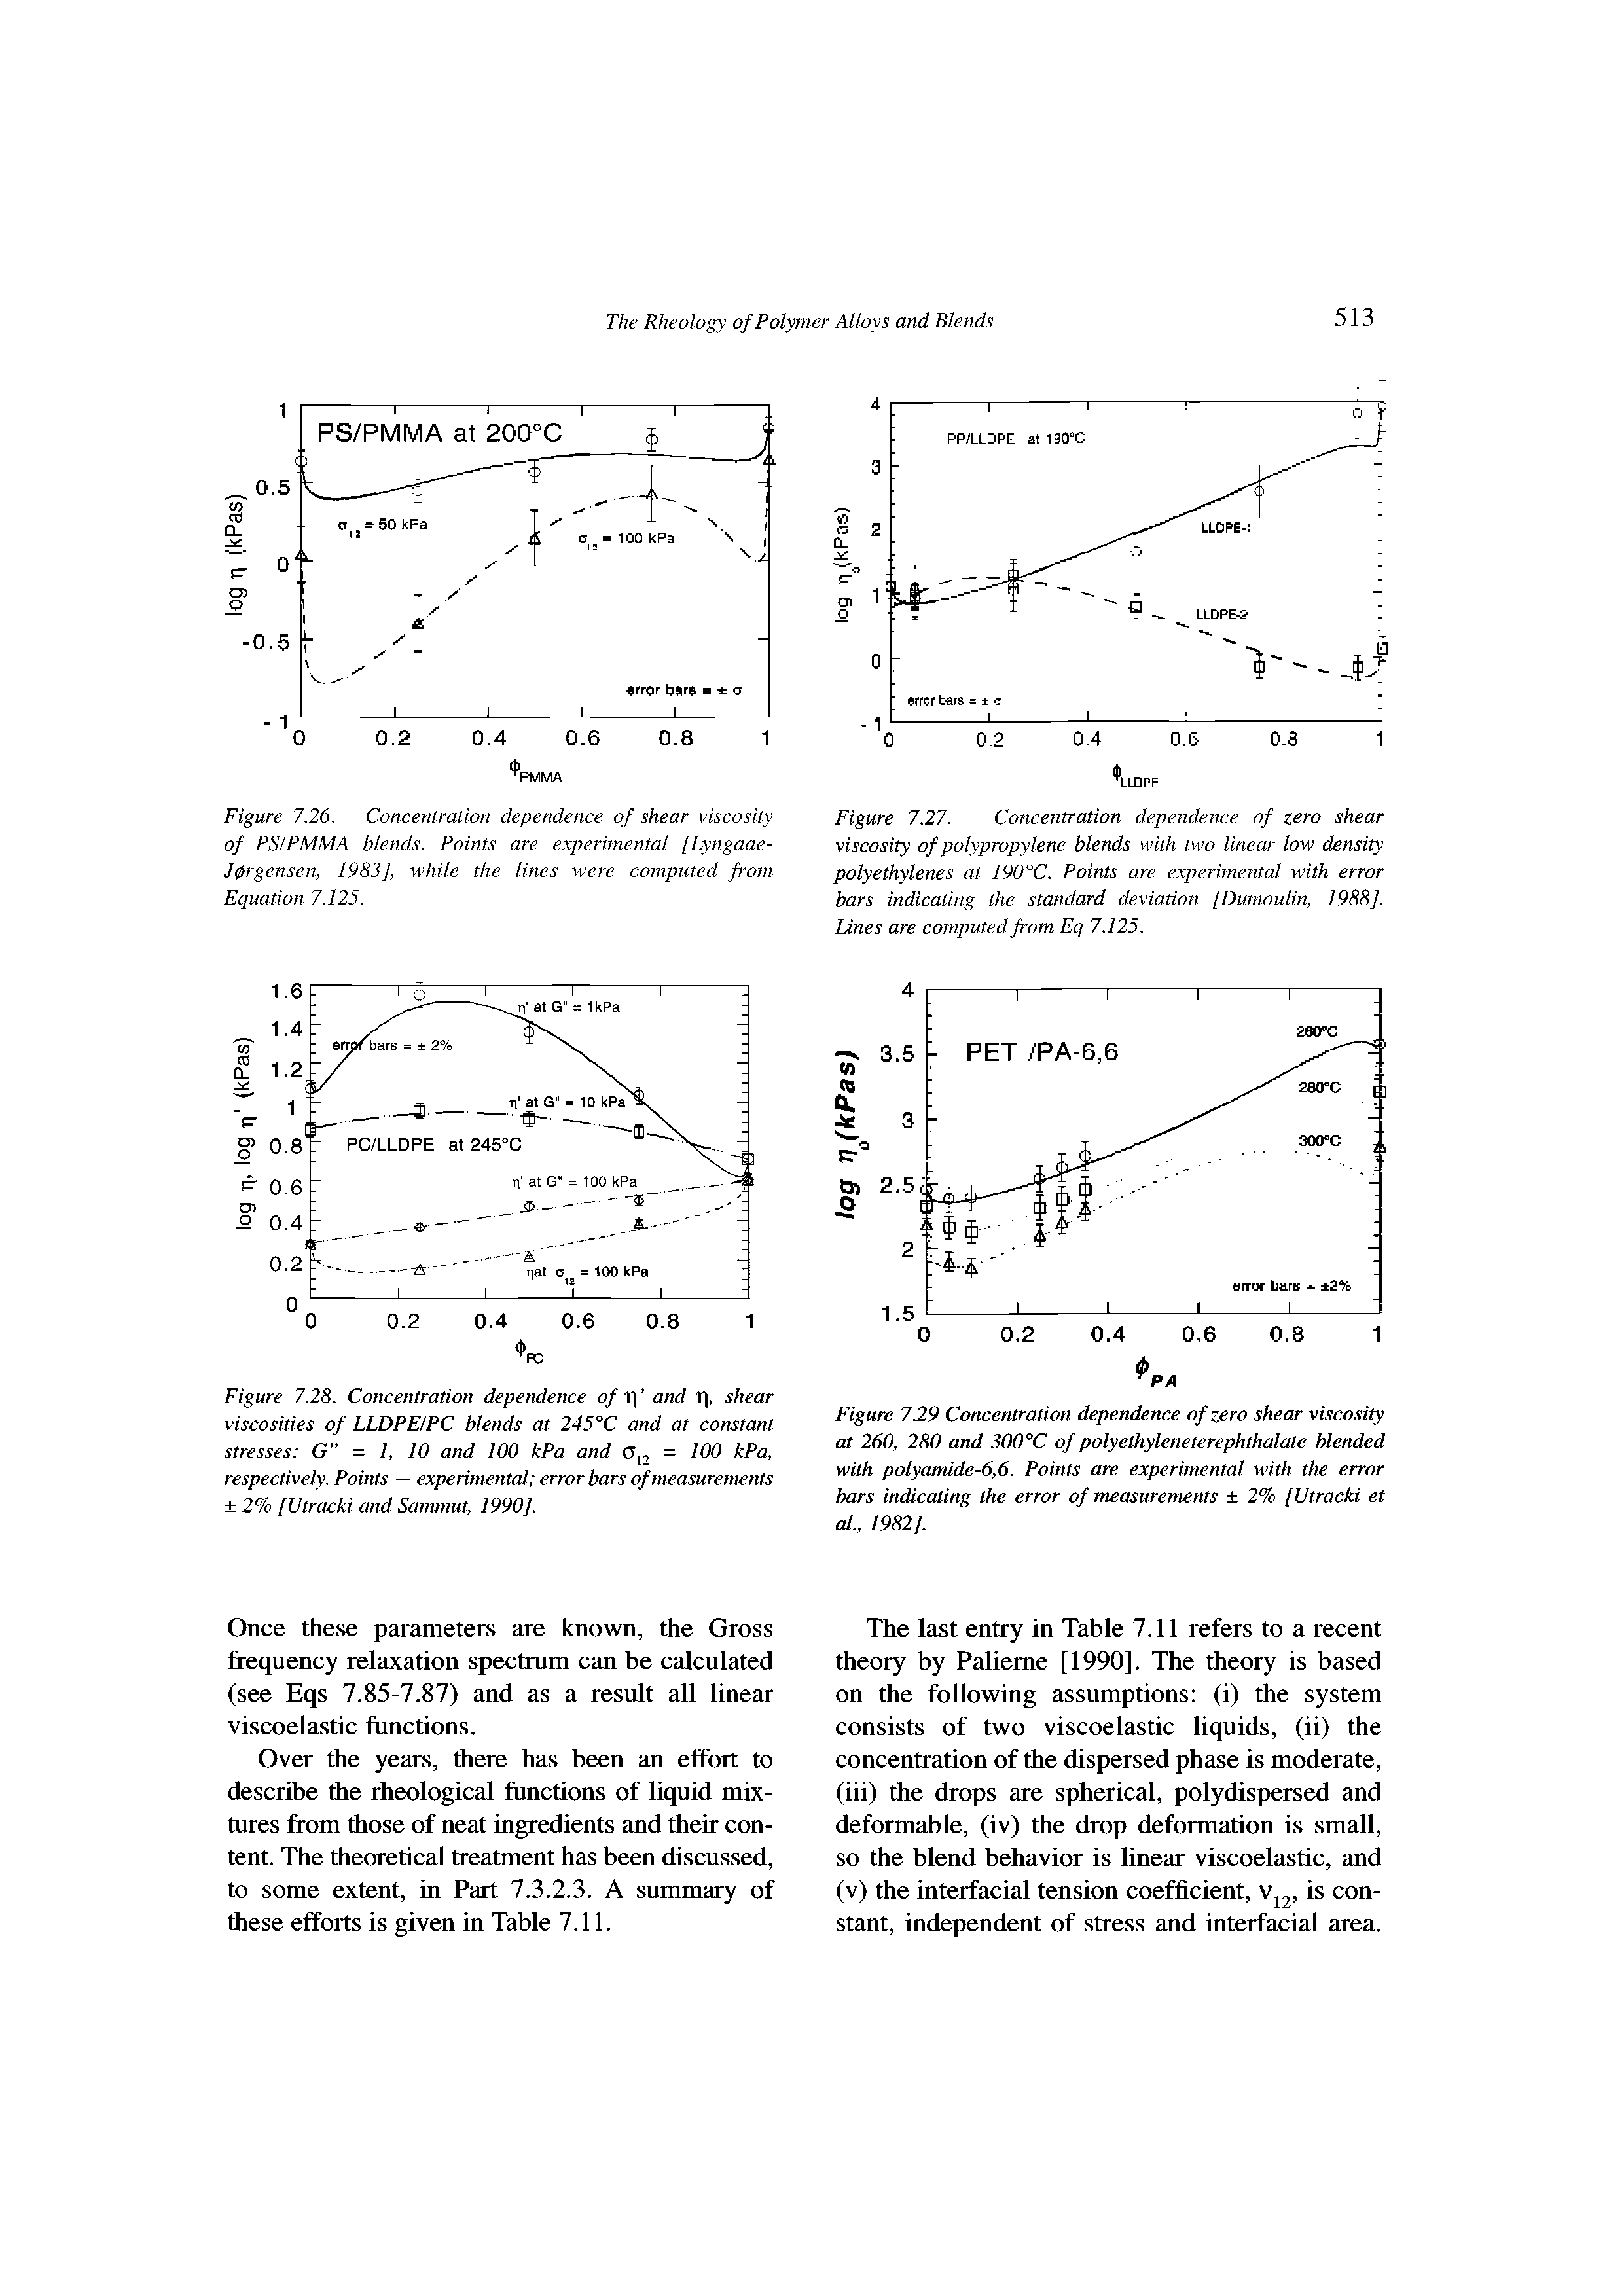 Figure 7.29 Concentration dependence of zero shear viscosity at 260, 280 and 300°C of polyethyleneterephthalate blended with polyamide-6,6. Points are experimental with the error bars indicating the error of measurements 2% ]Utracki et al, 1982].